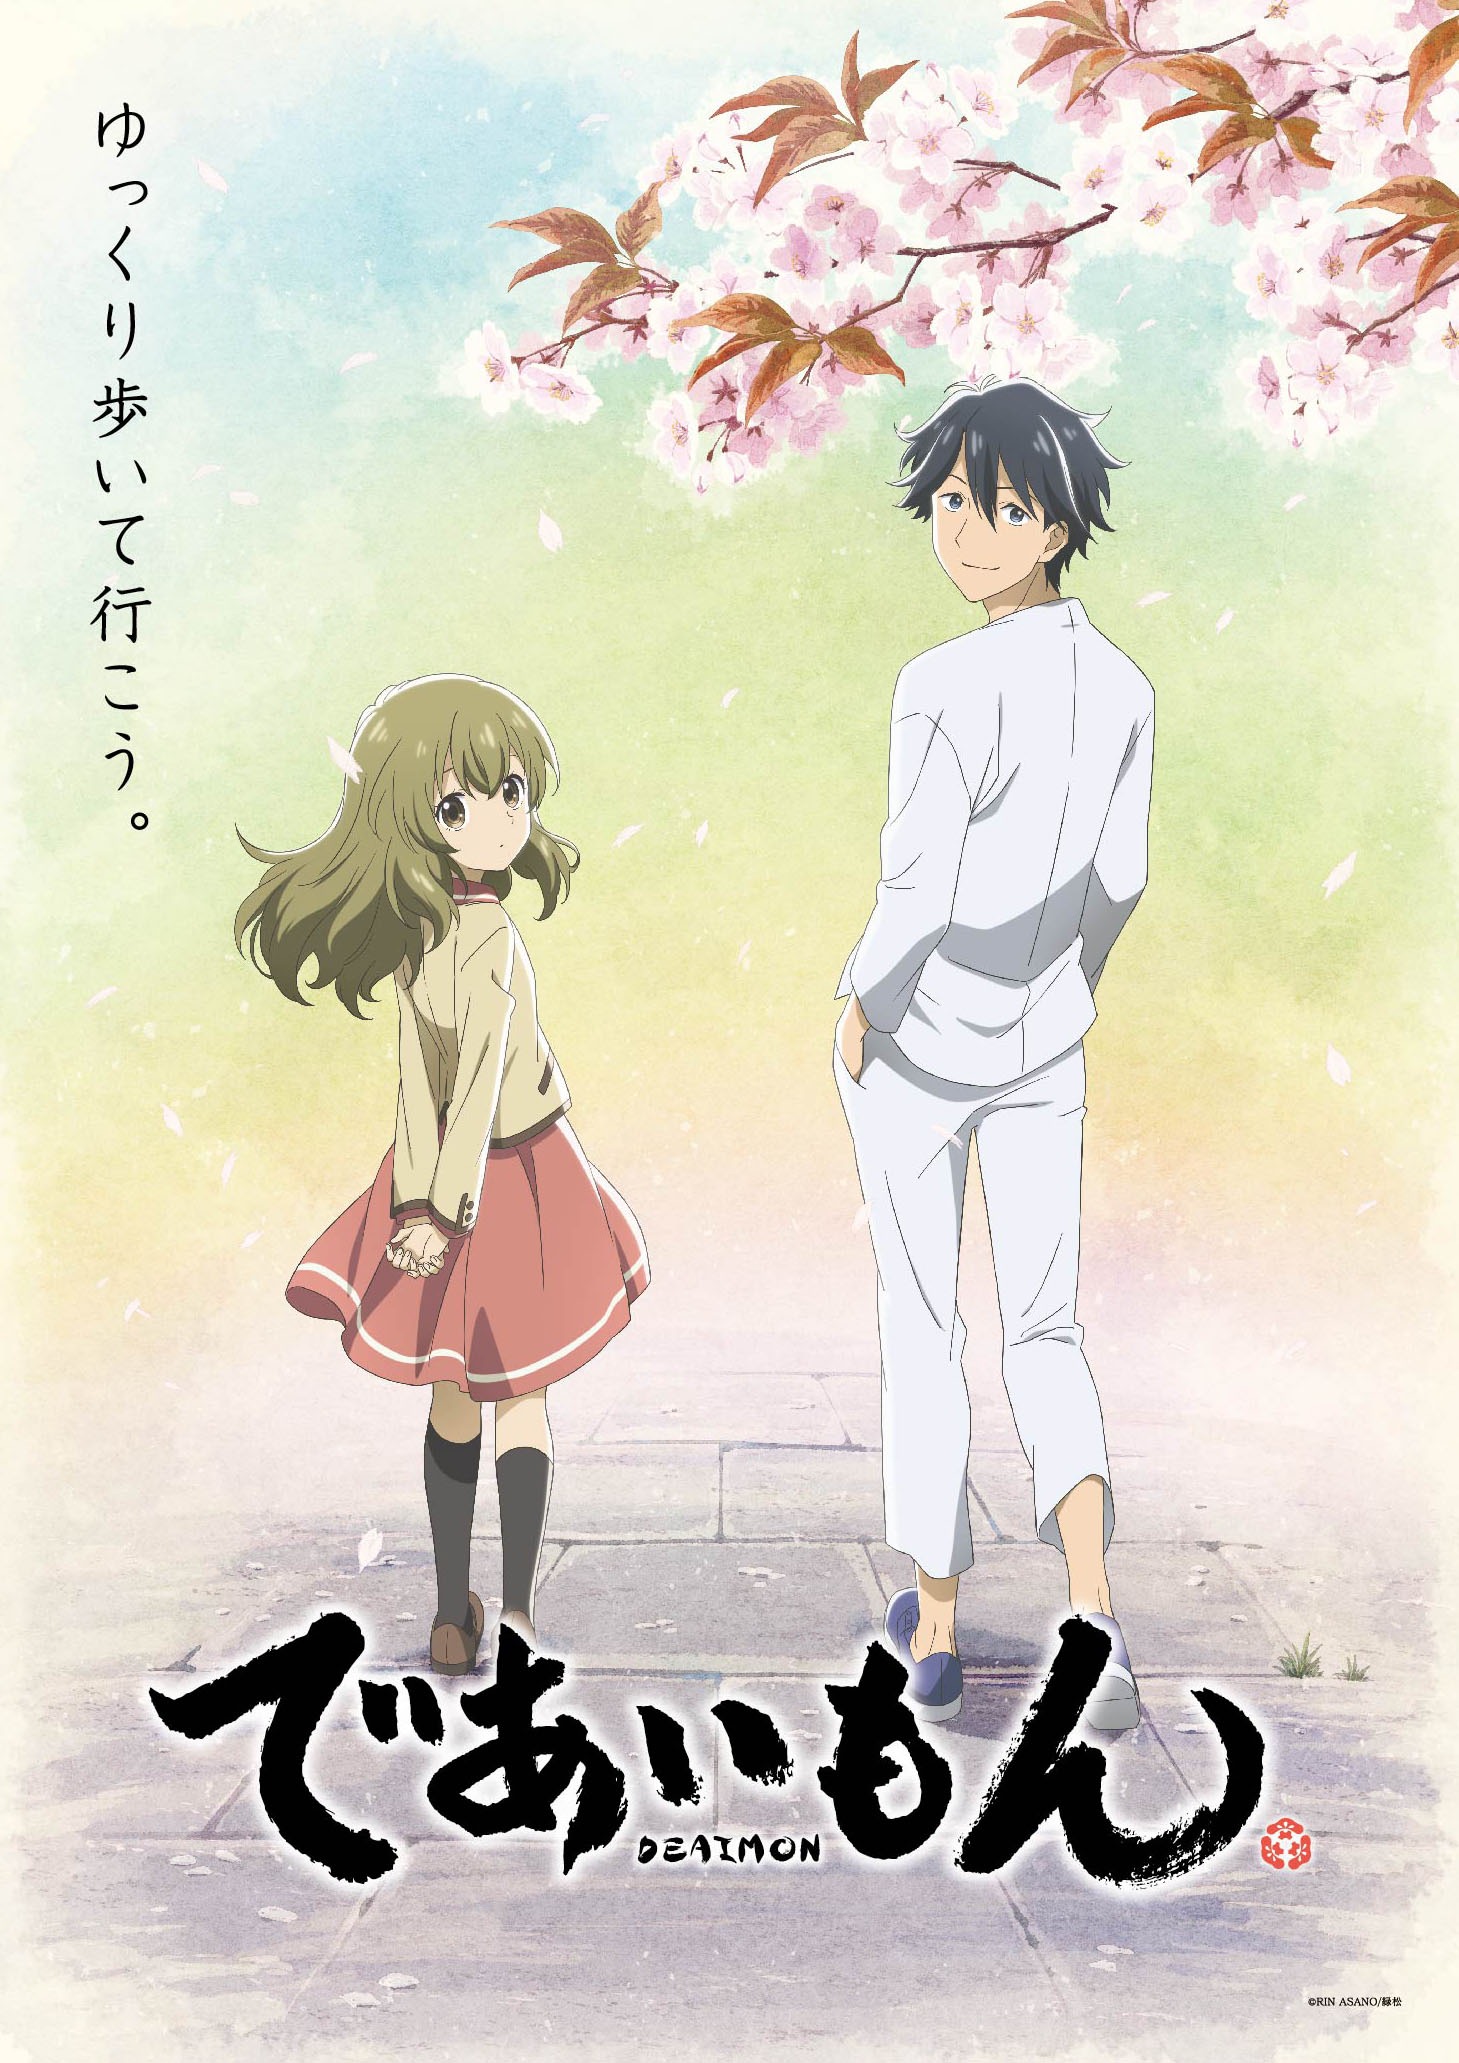 A key visual for the upcoming Deaimon TV anime featuring the main characters Itsuka Yukihira and Nagumo Irino strolling away from the view beneath the branch of a blooming cherry blossom tree.